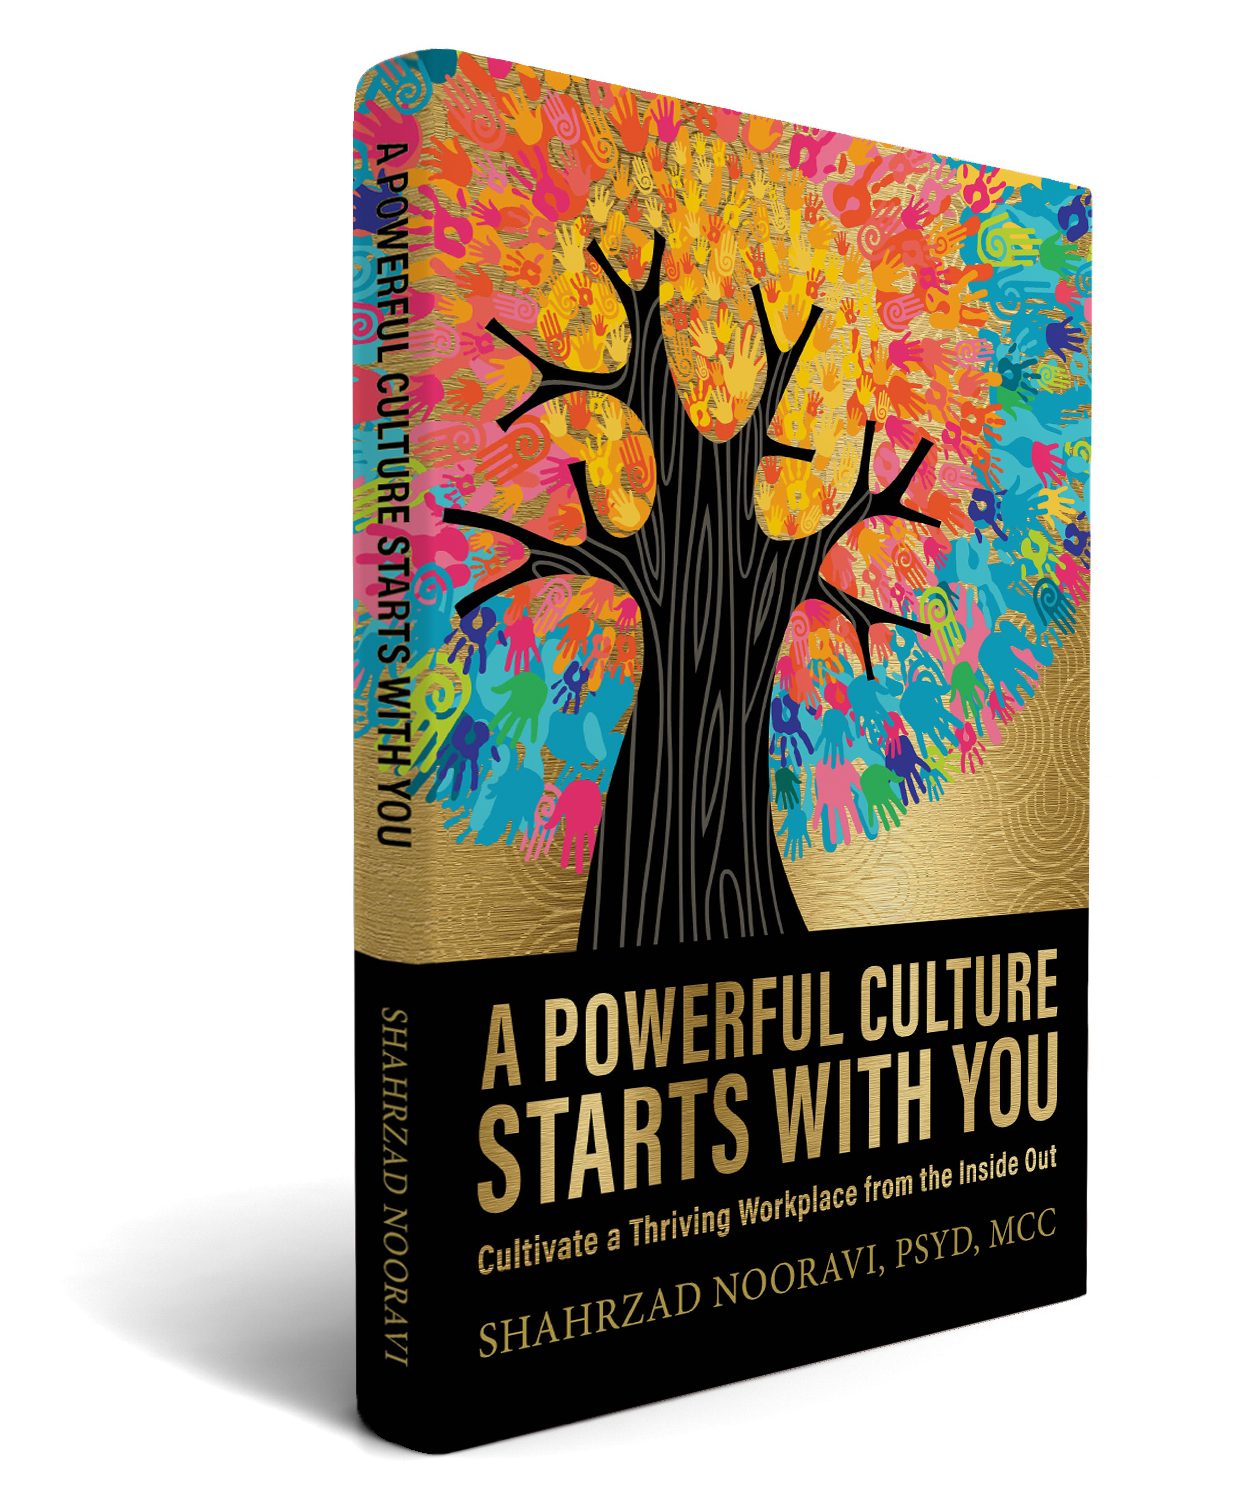 A Powerful Culture Starts with Book Book Image - Tree with colorful handprints as leaves. Gold background.